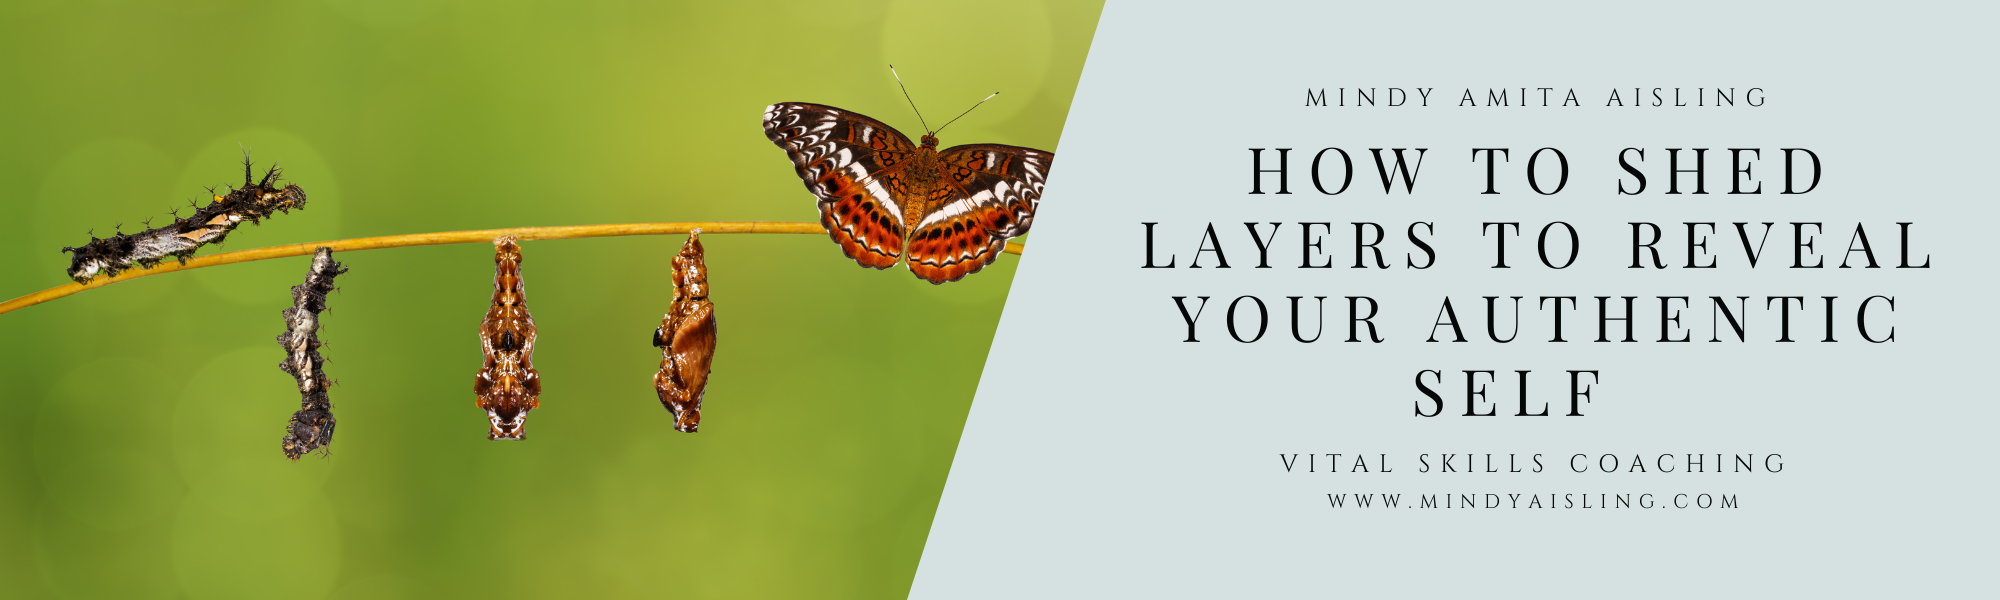 How to Shed Layers to Reveal Your Authentic Self